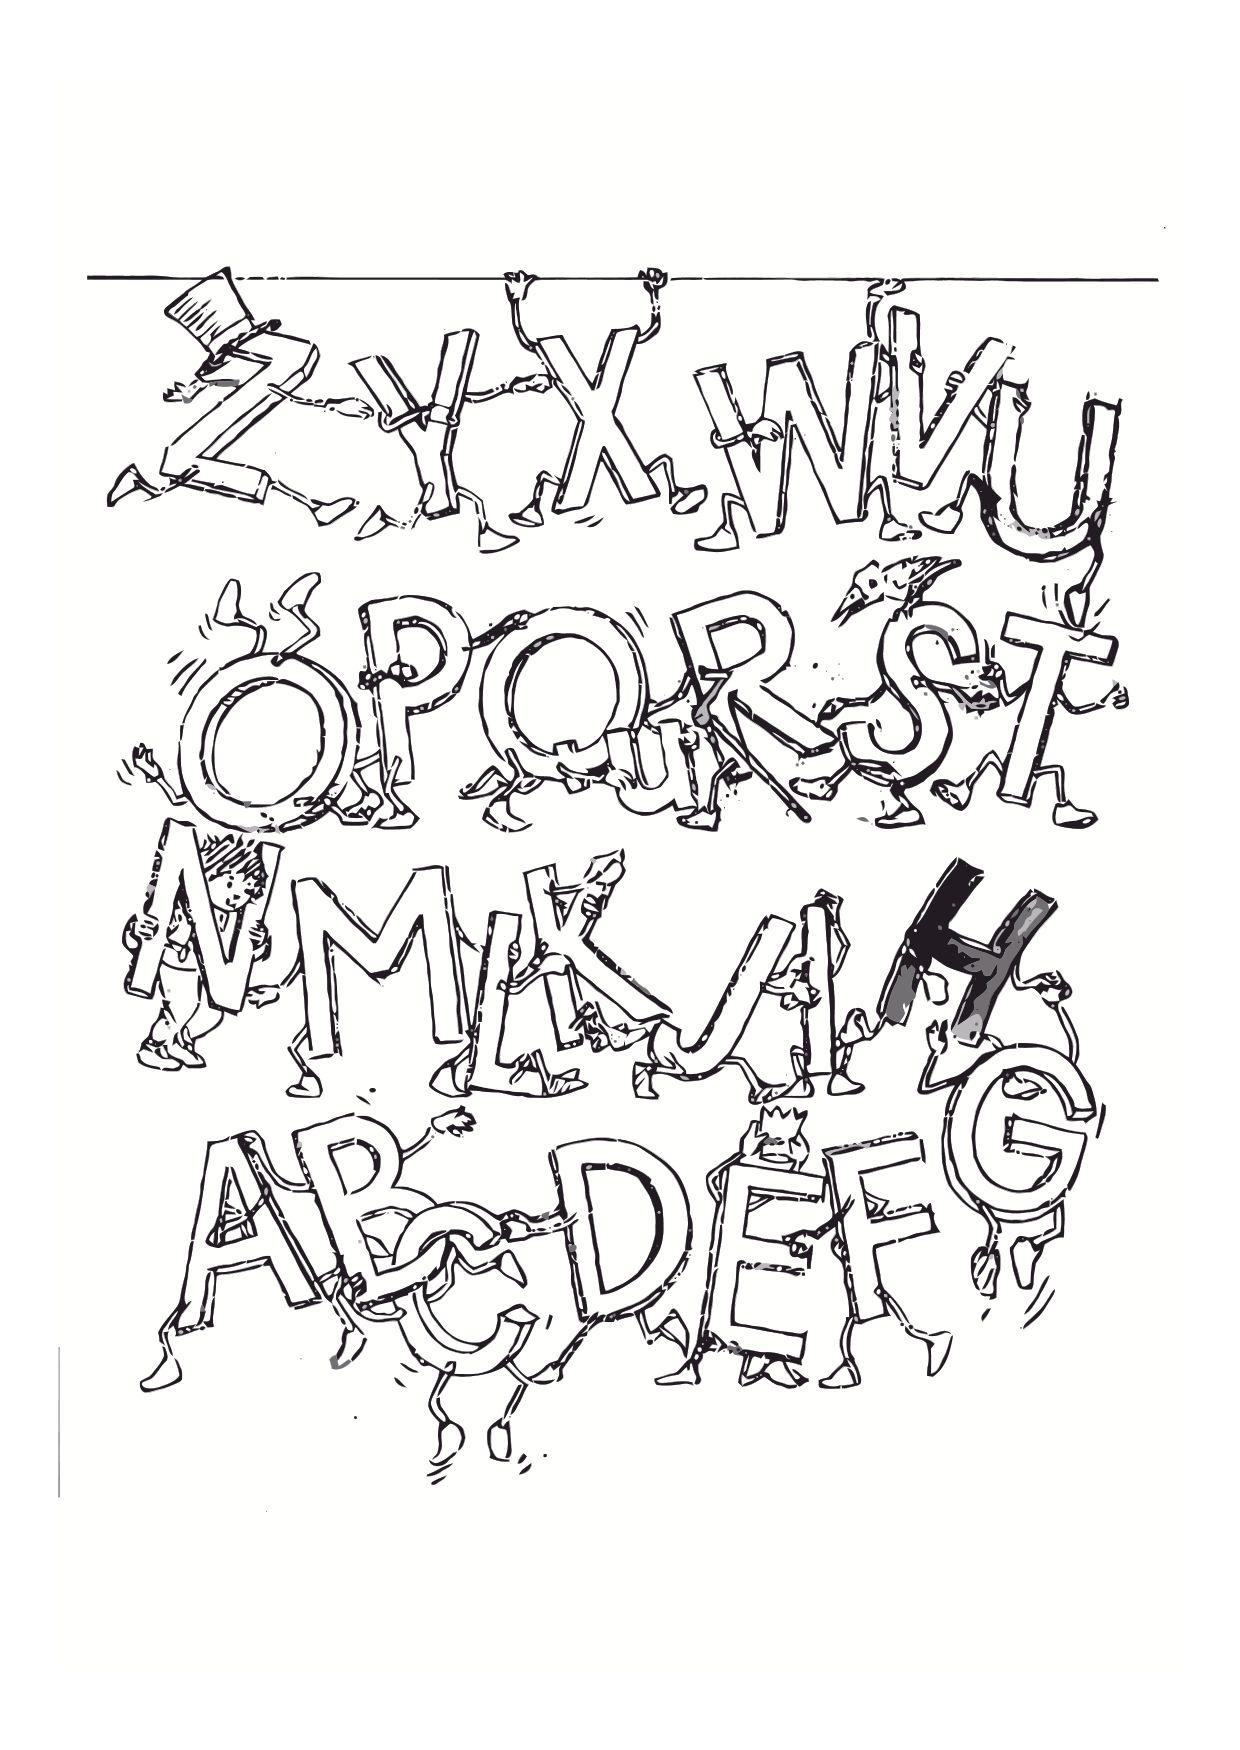 A funny alphabet with characters to print and color